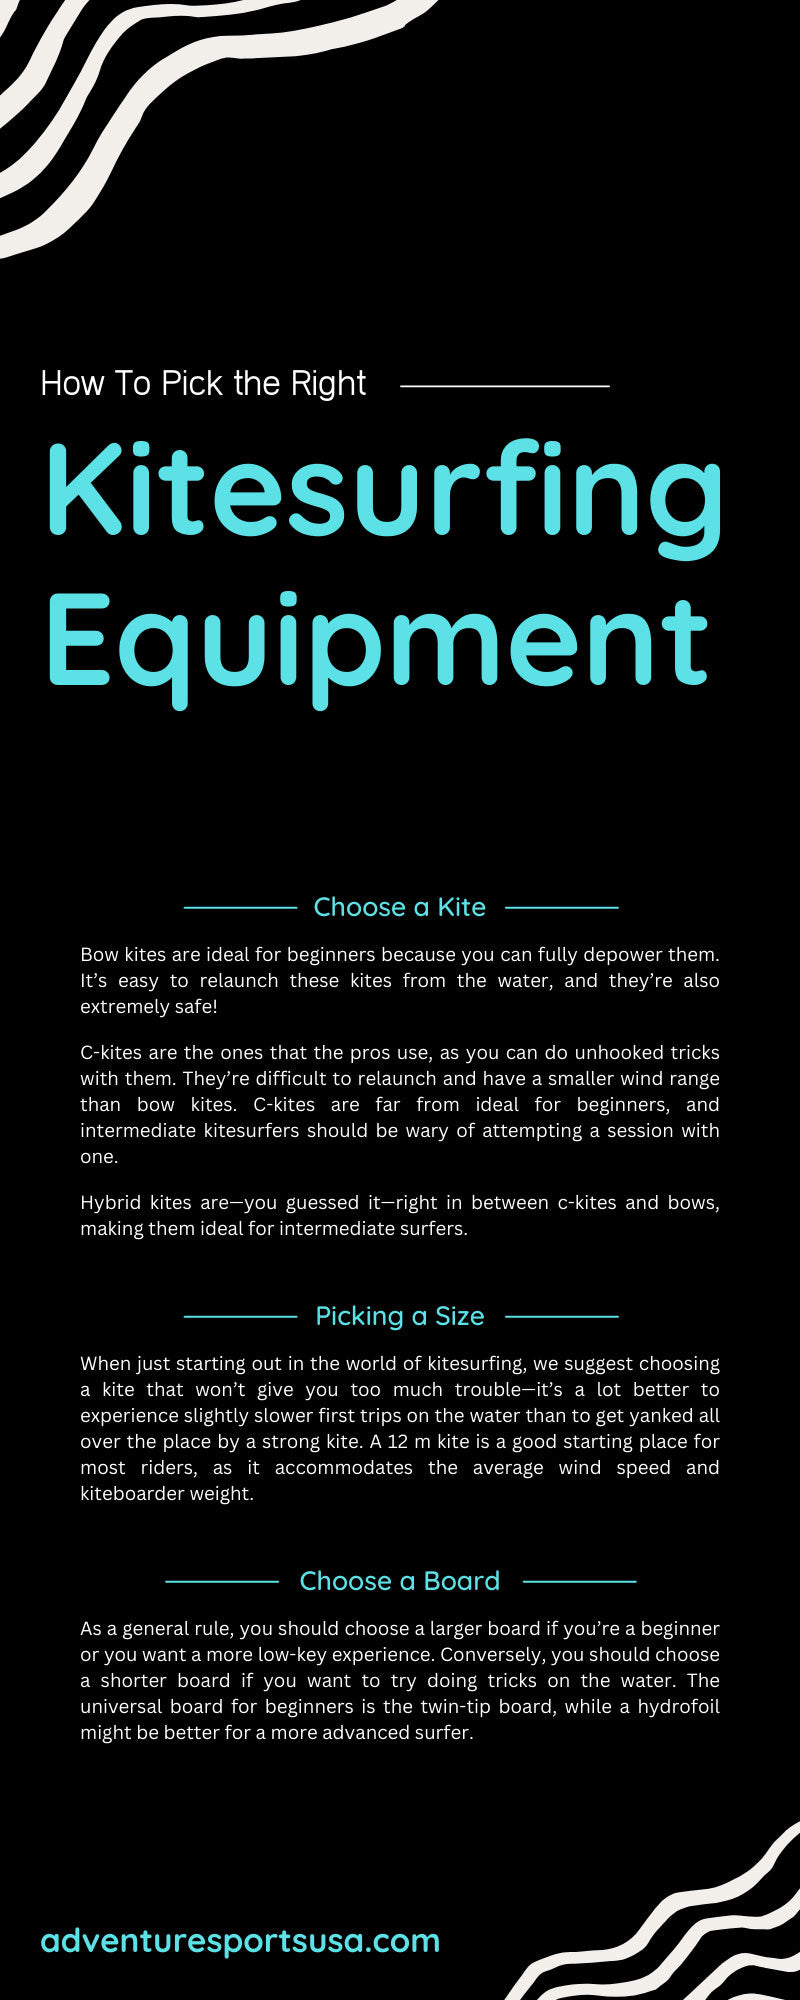 How To Pick the Right Kitesurfing Equipment